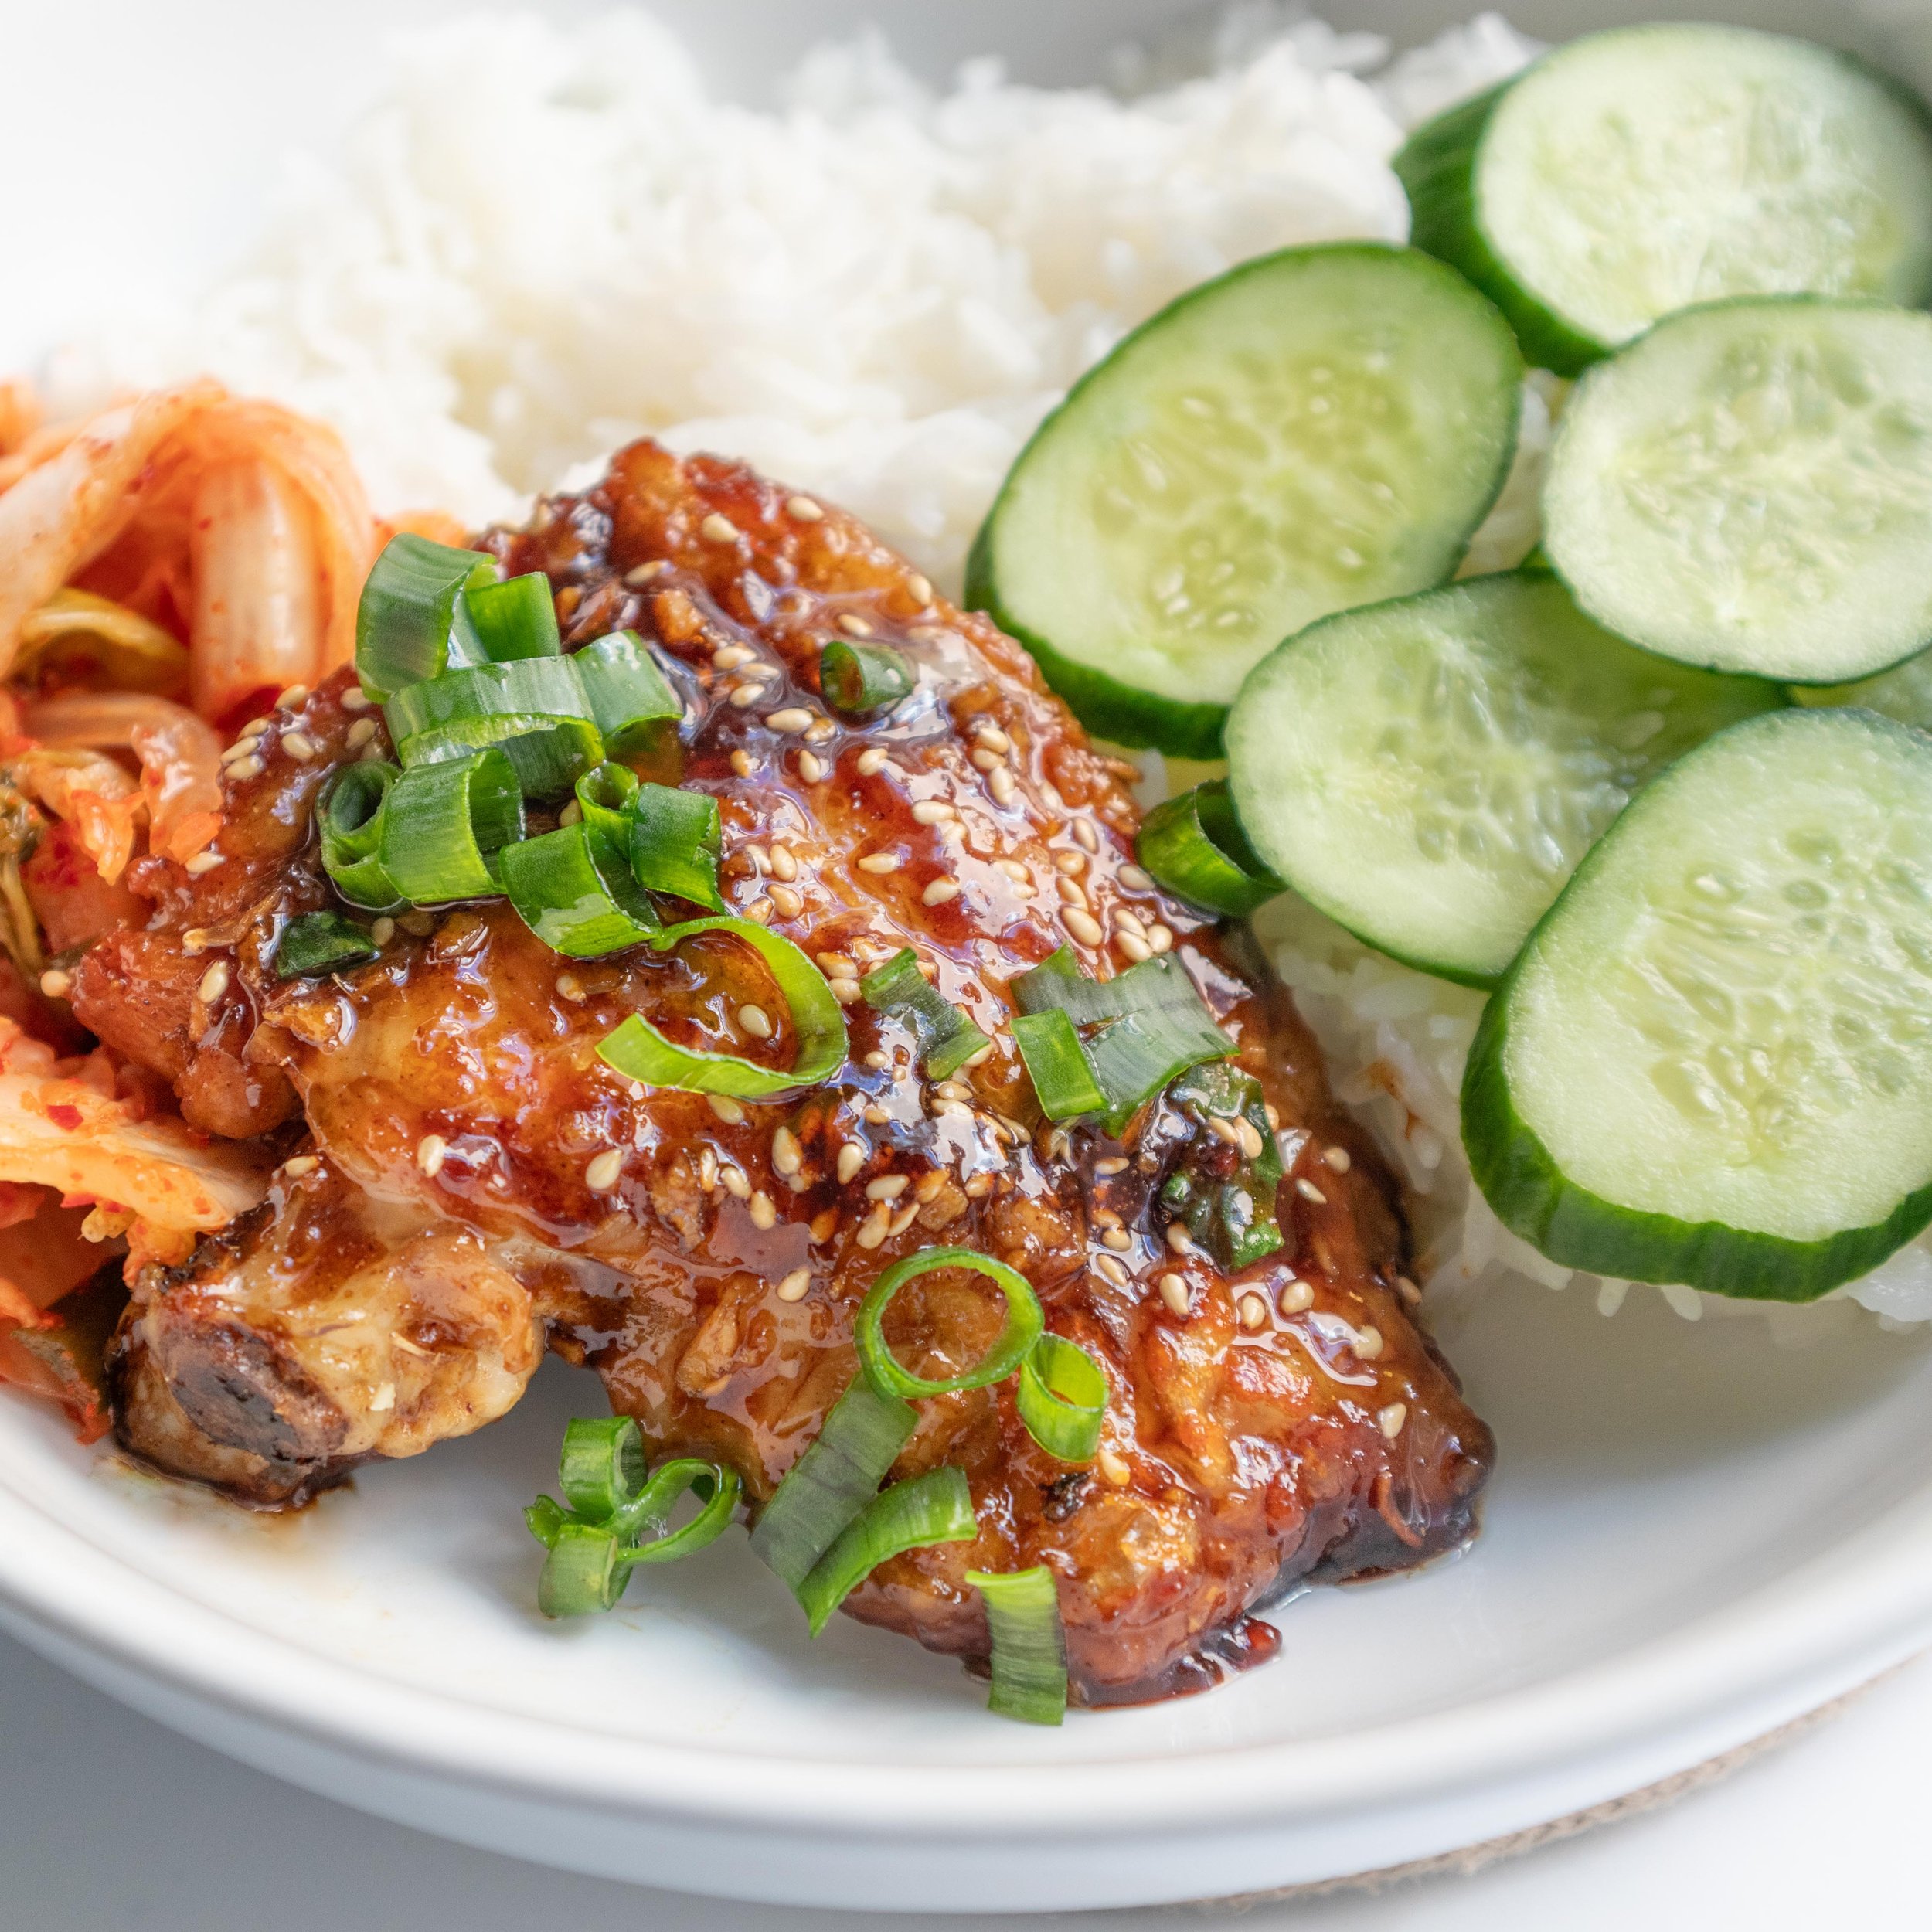 Pan-fried soy sauce glazed chicken served with fresh cucumber slices, steamed rice and kimchi.